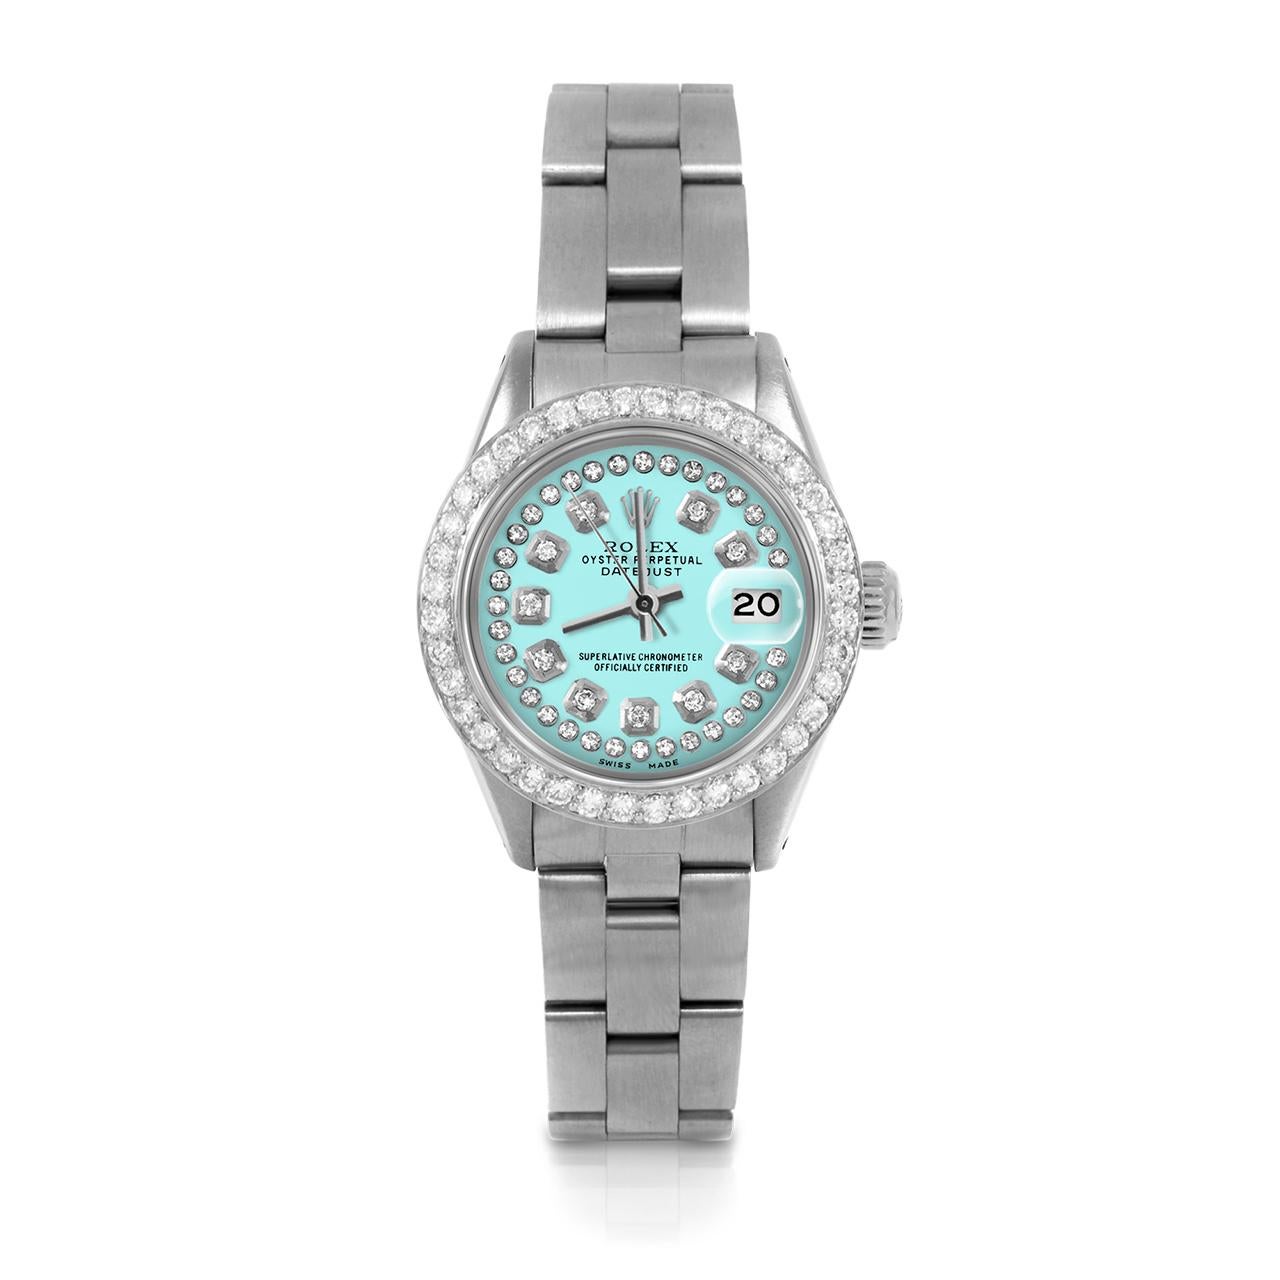 Pre-Owned Rolex 6917 Ladies 26mm Datejust Watch, Custom Turquoise String Diamond Dial & Custom 1ct Diamond Bezel on Rolex Stainless Steel Oyster Band.   

SKU 6917-SS-TRQ-STRD-BDS-OYS


Brand/Model:        Rolex Datejust
Model Number:       